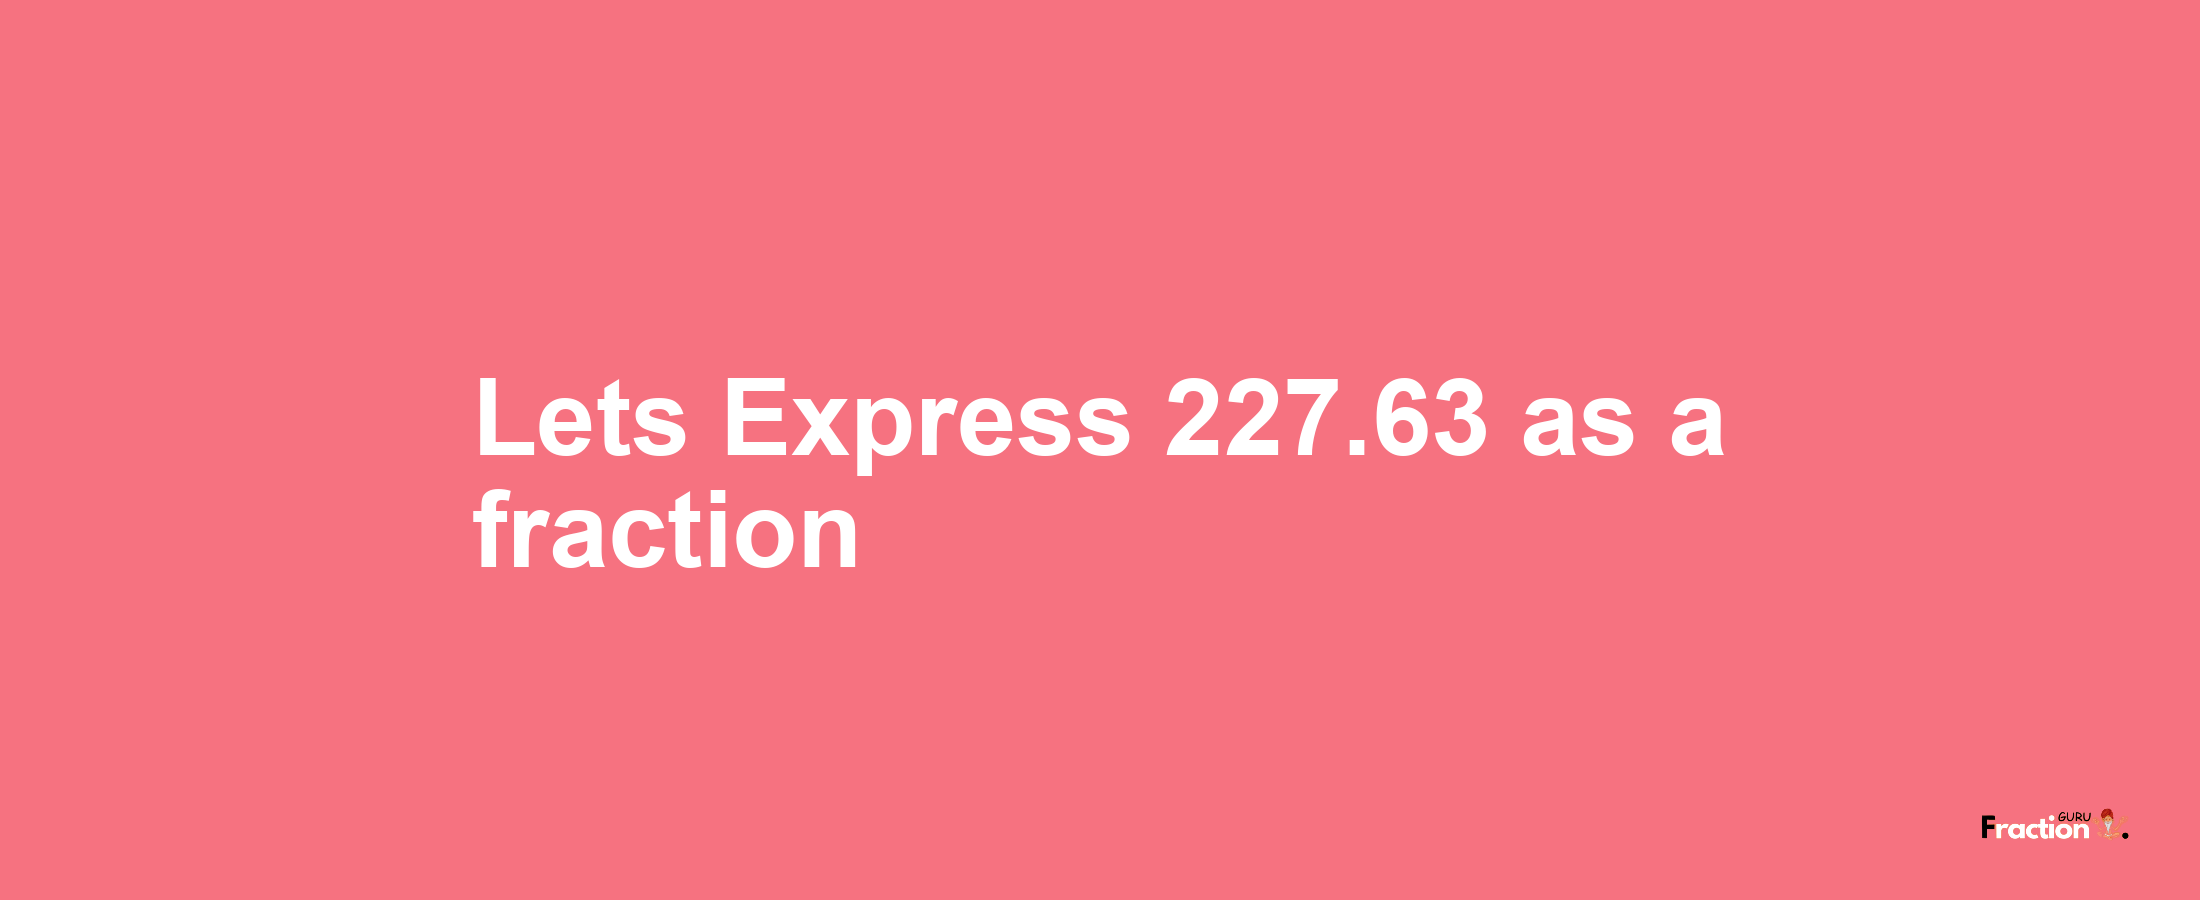 Lets Express 227.63 as afraction